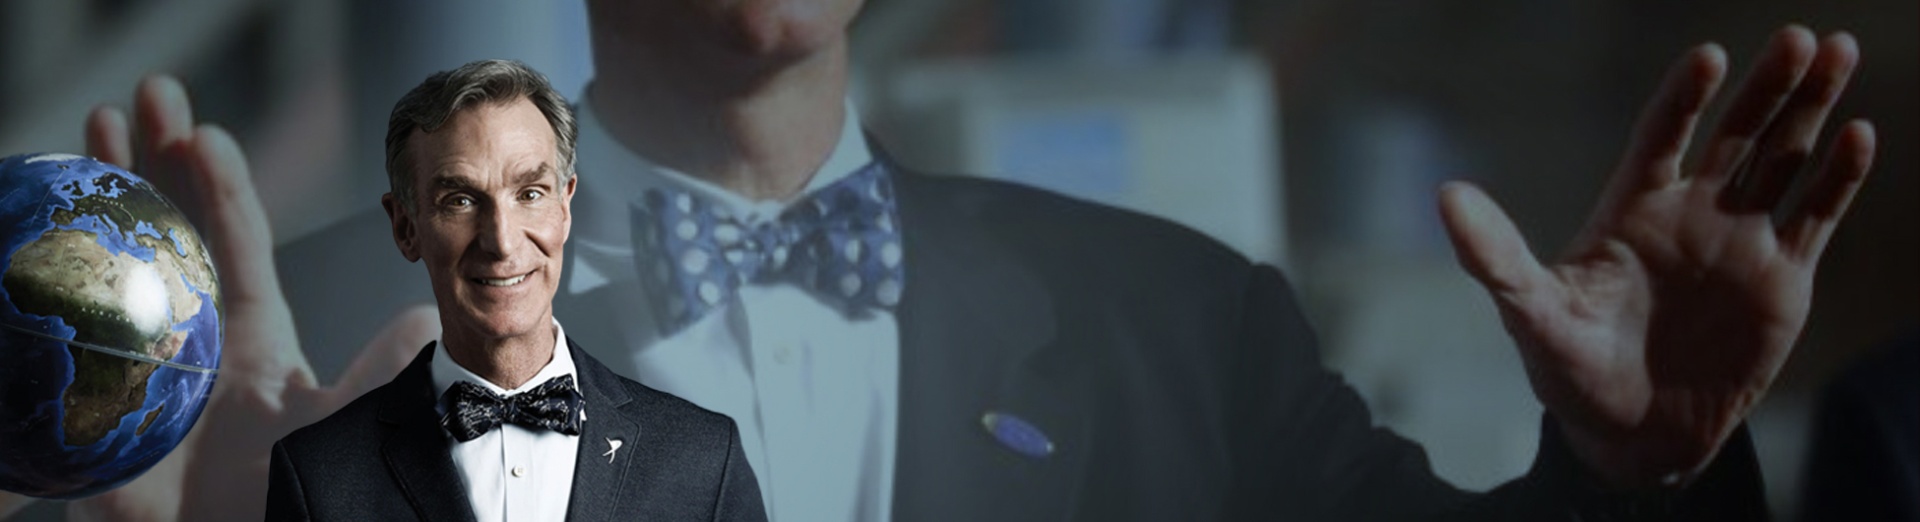 Bill Nye in a bow tie smiling in front of a background of himself, larger.